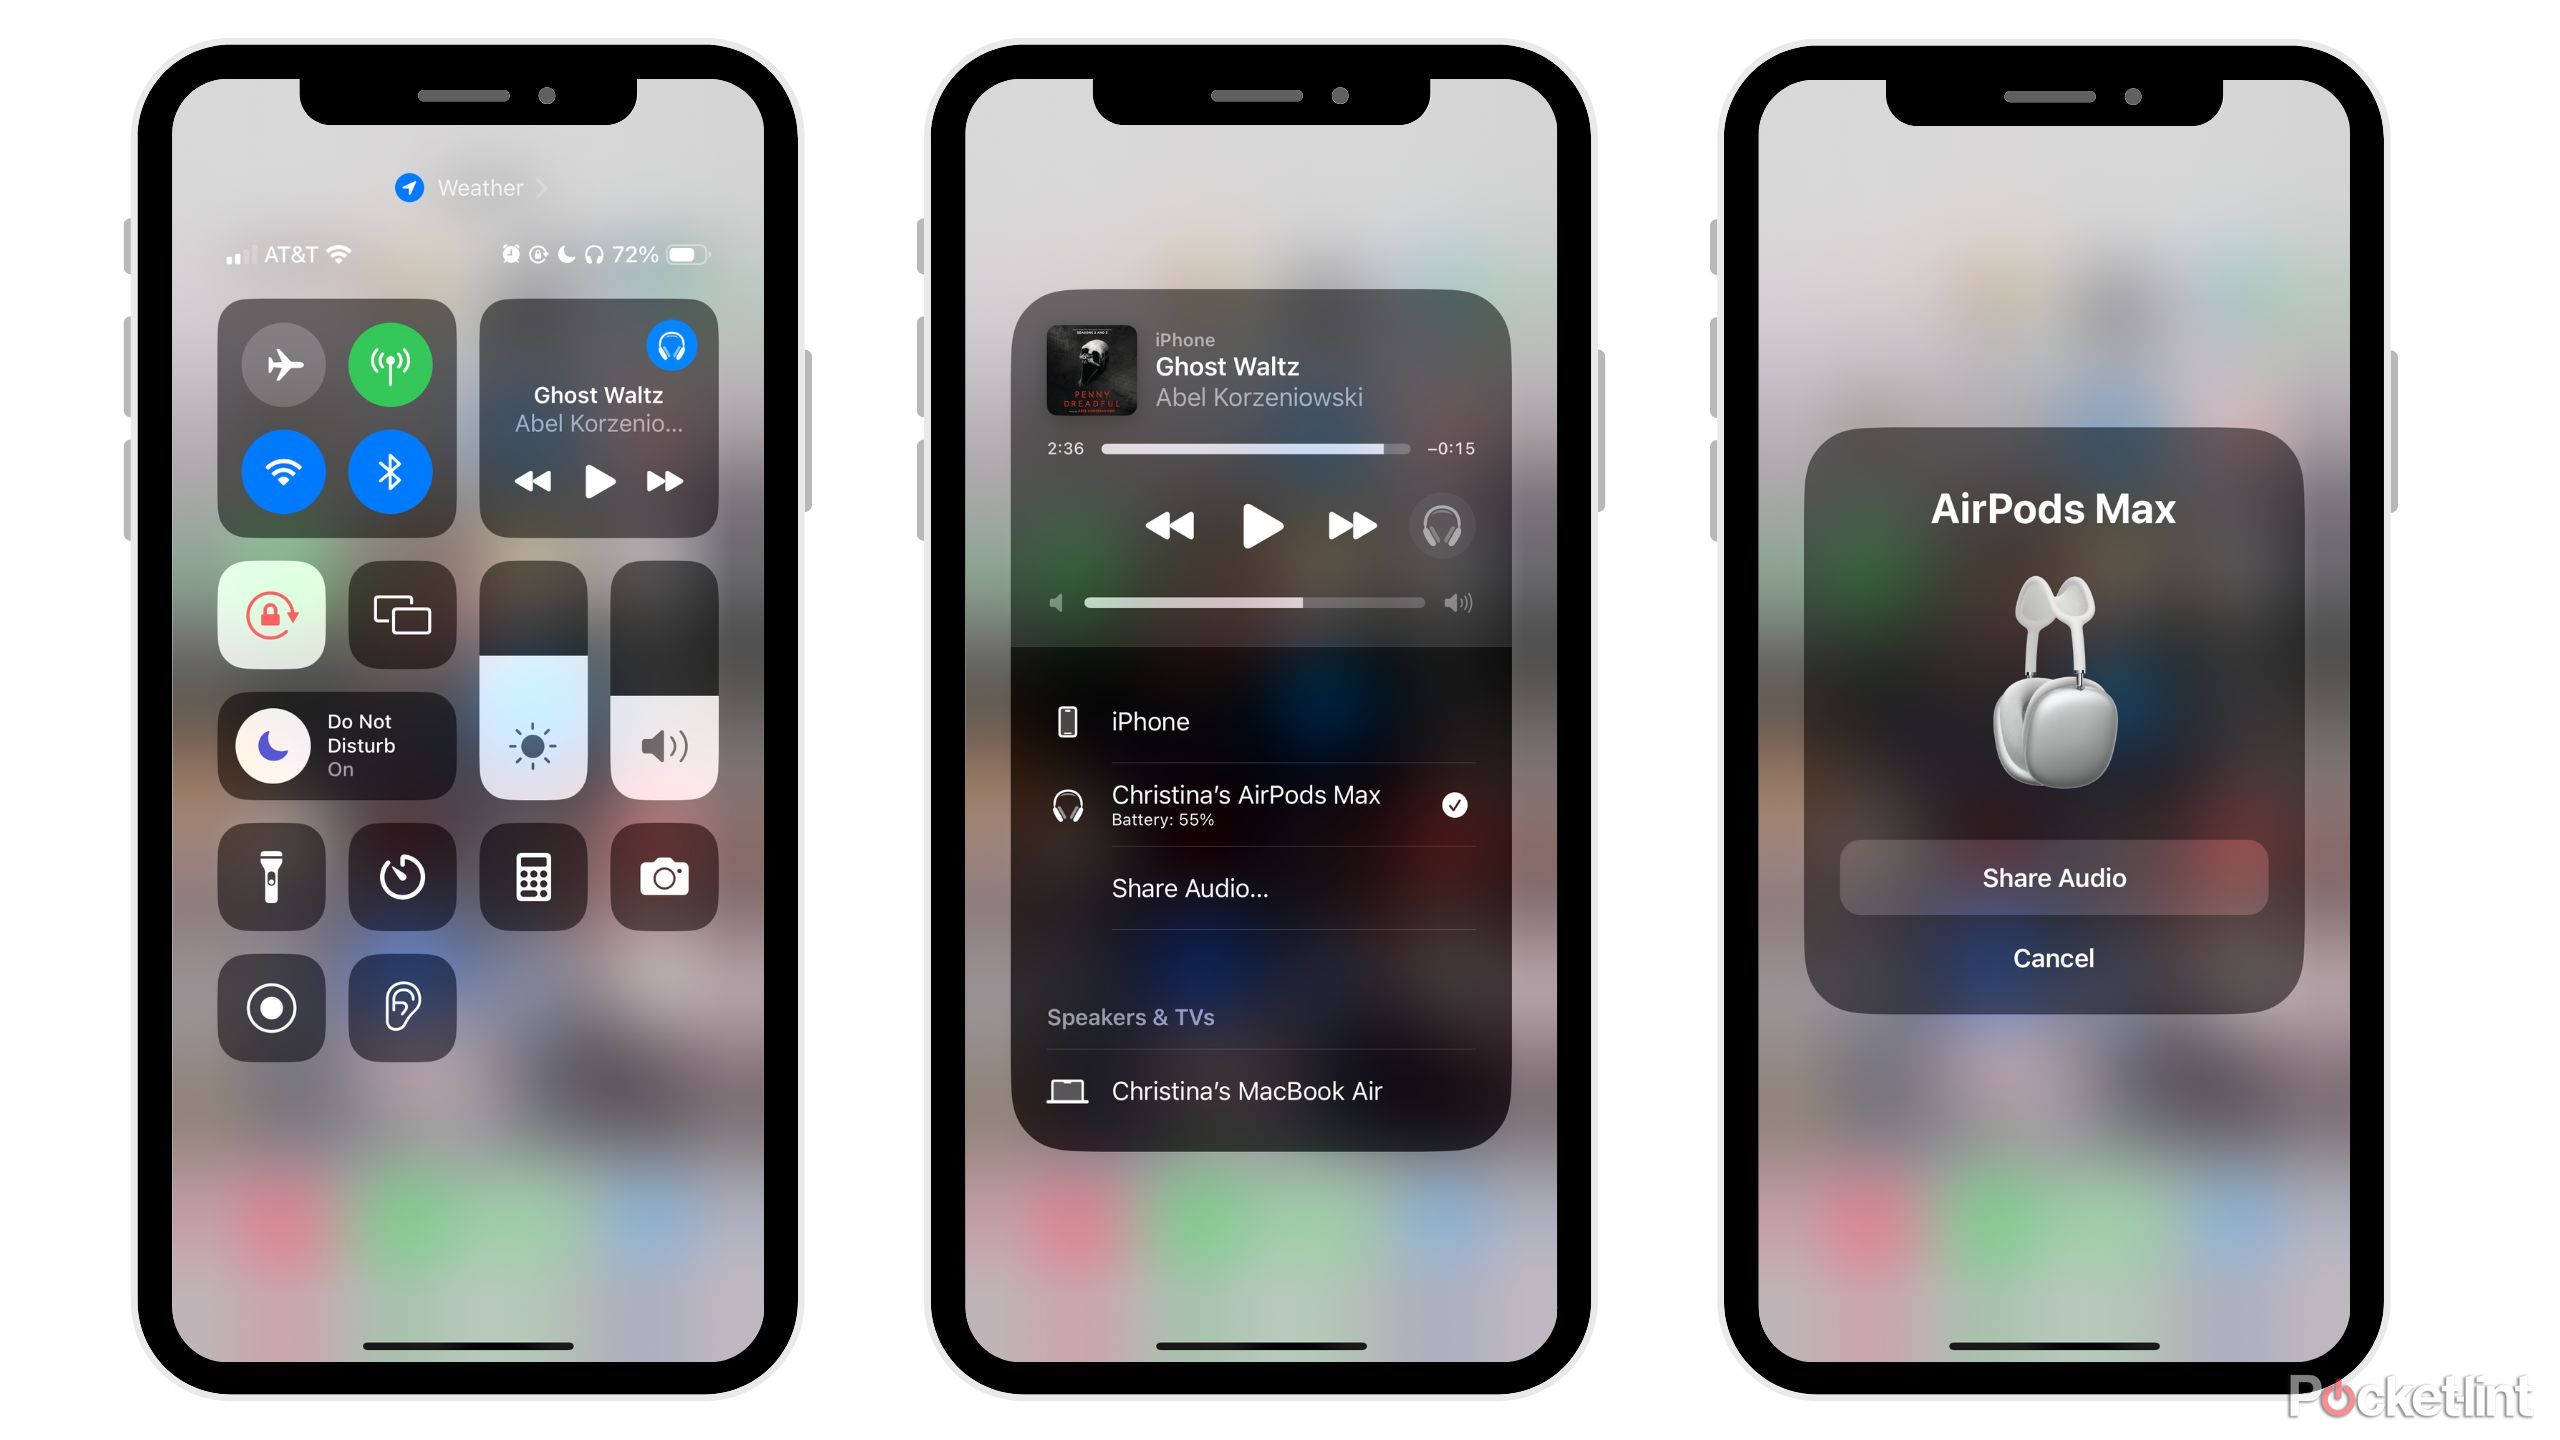 Sharing audio on iPhone with AirPods Max